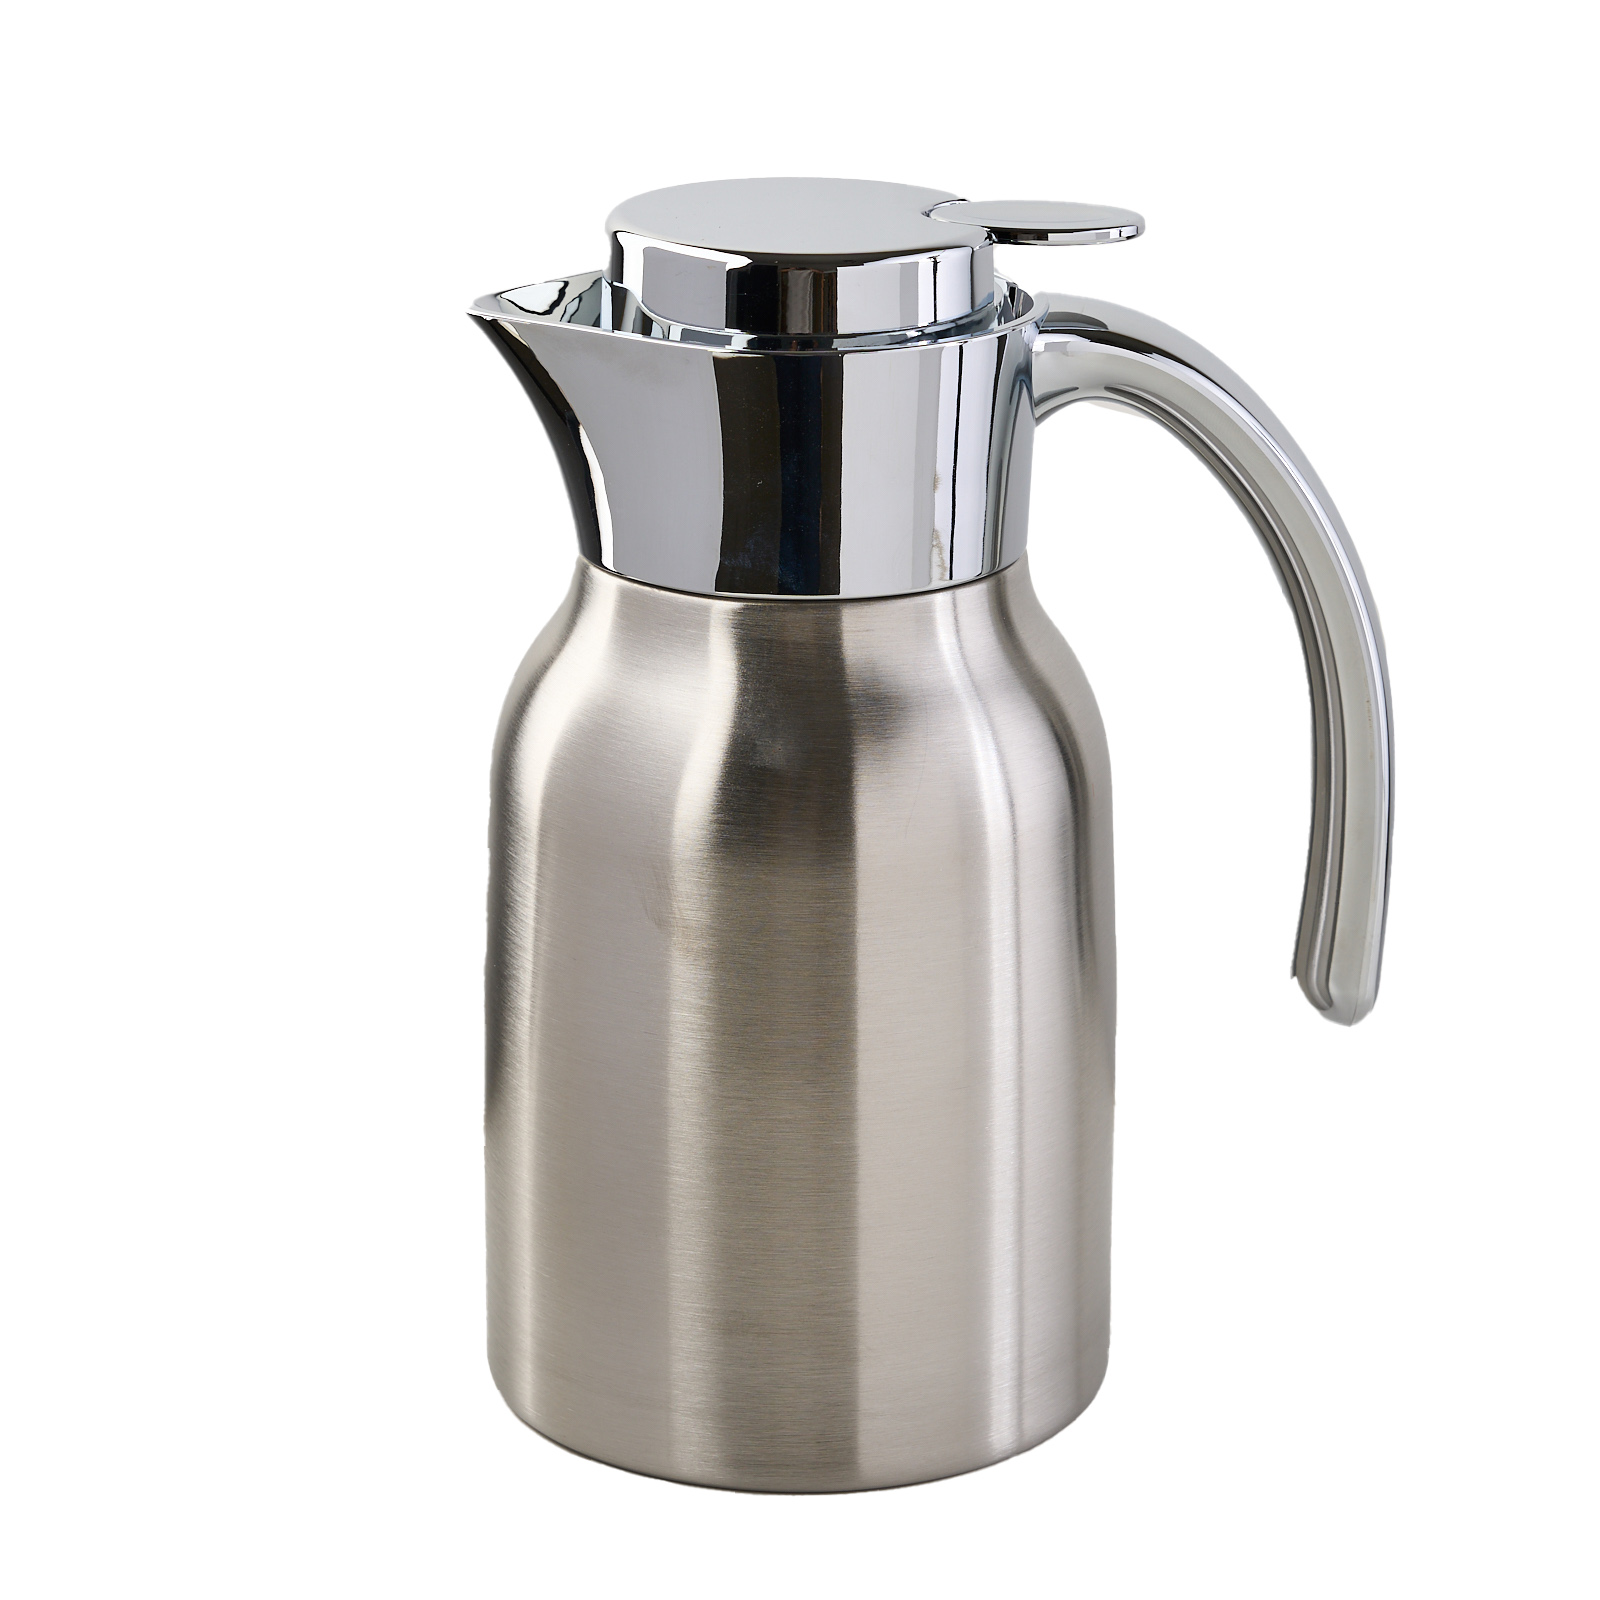 DSC03389 2 - 2023 new Design Insulated DOUBLE STAINLESS STEEL Hot Drink Jug Vacuum Jug with Handle Stainless Steel